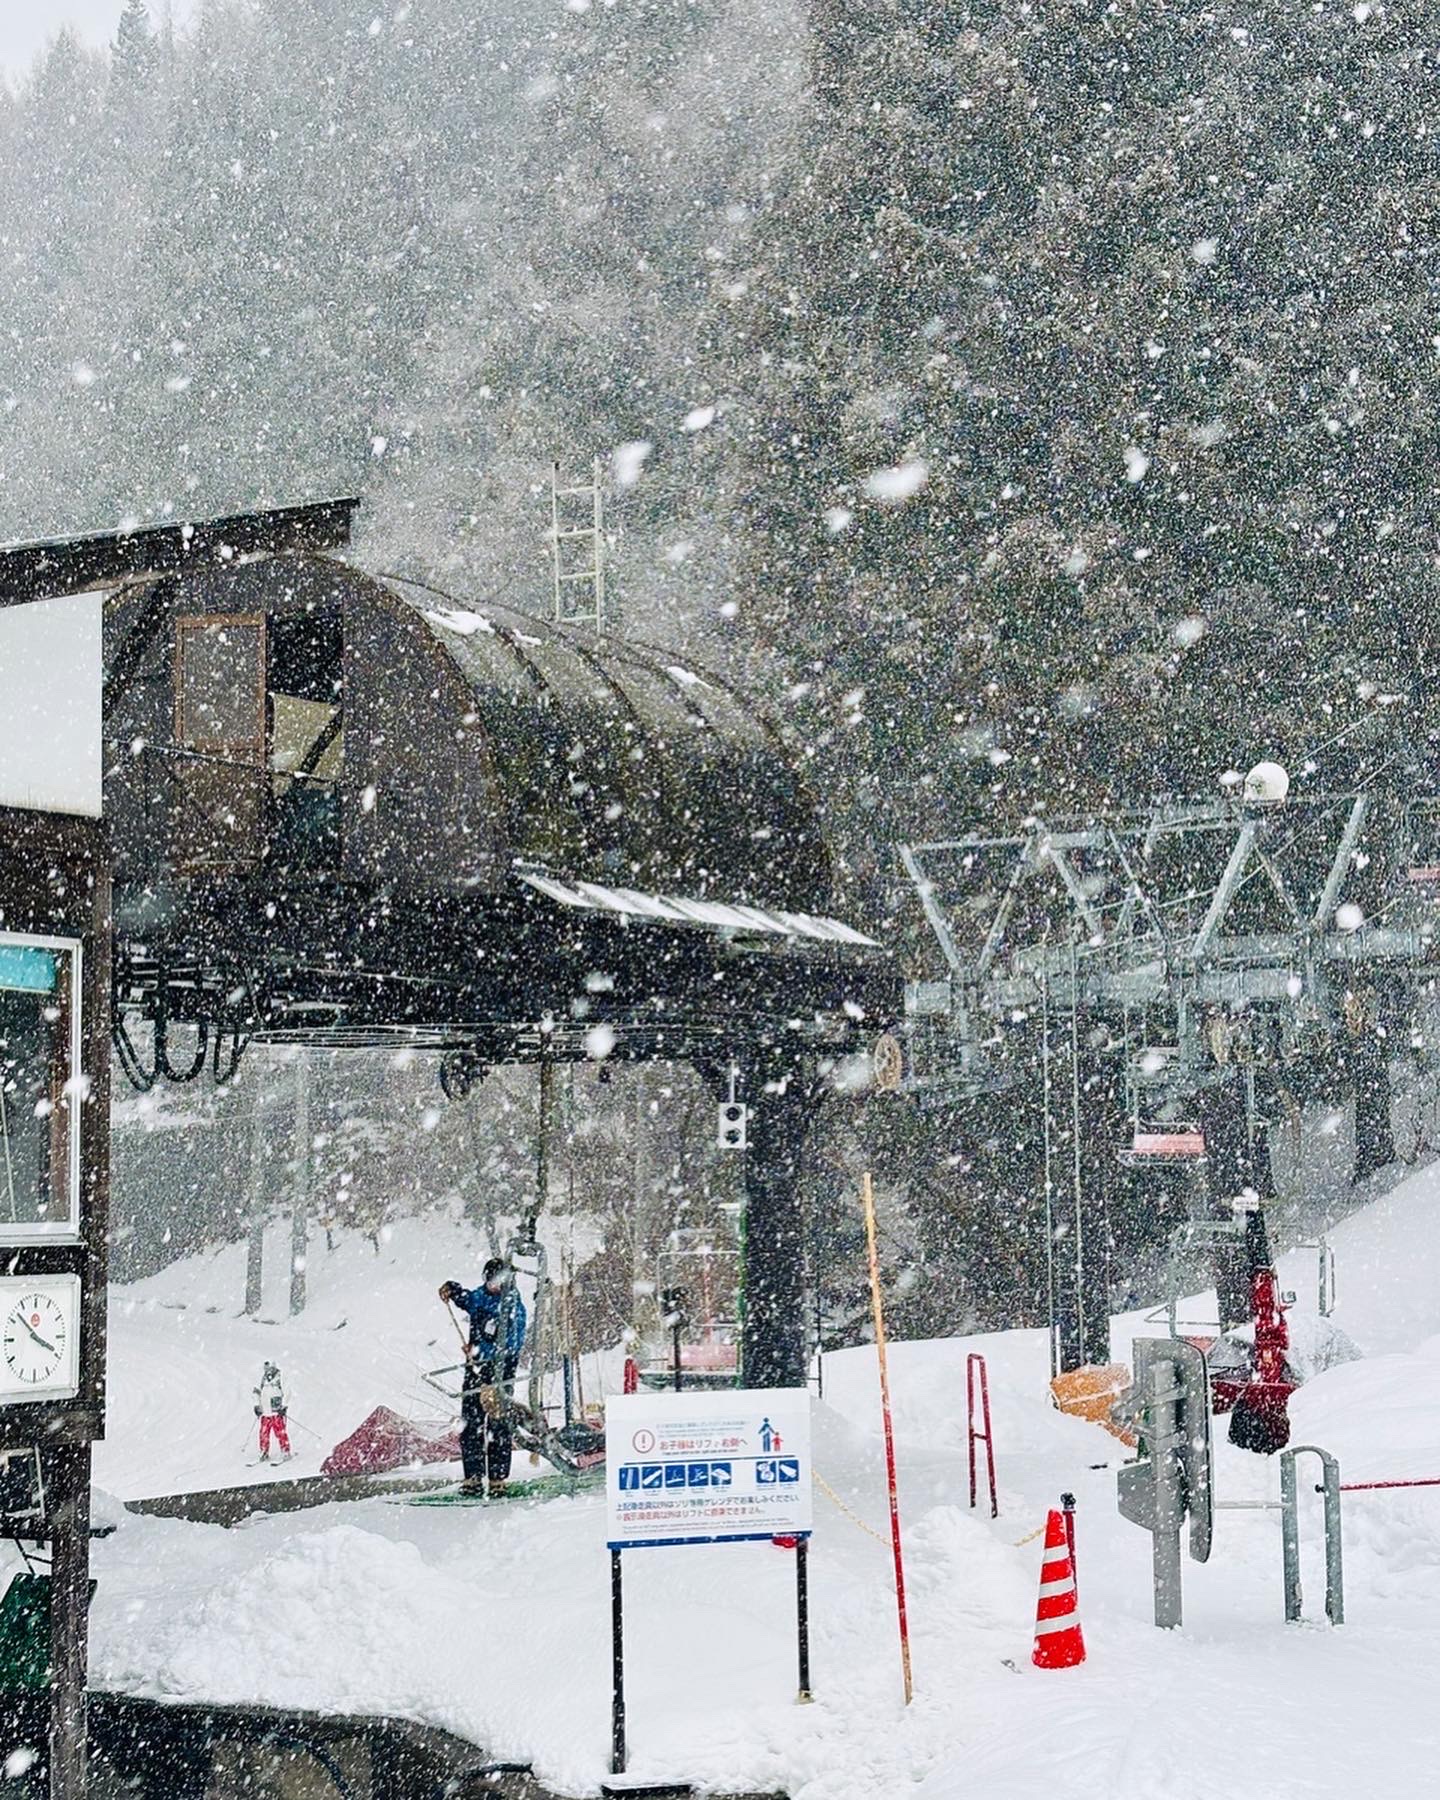 Heavy snow dumps incoming this week which should cover the whole resort in white fresh